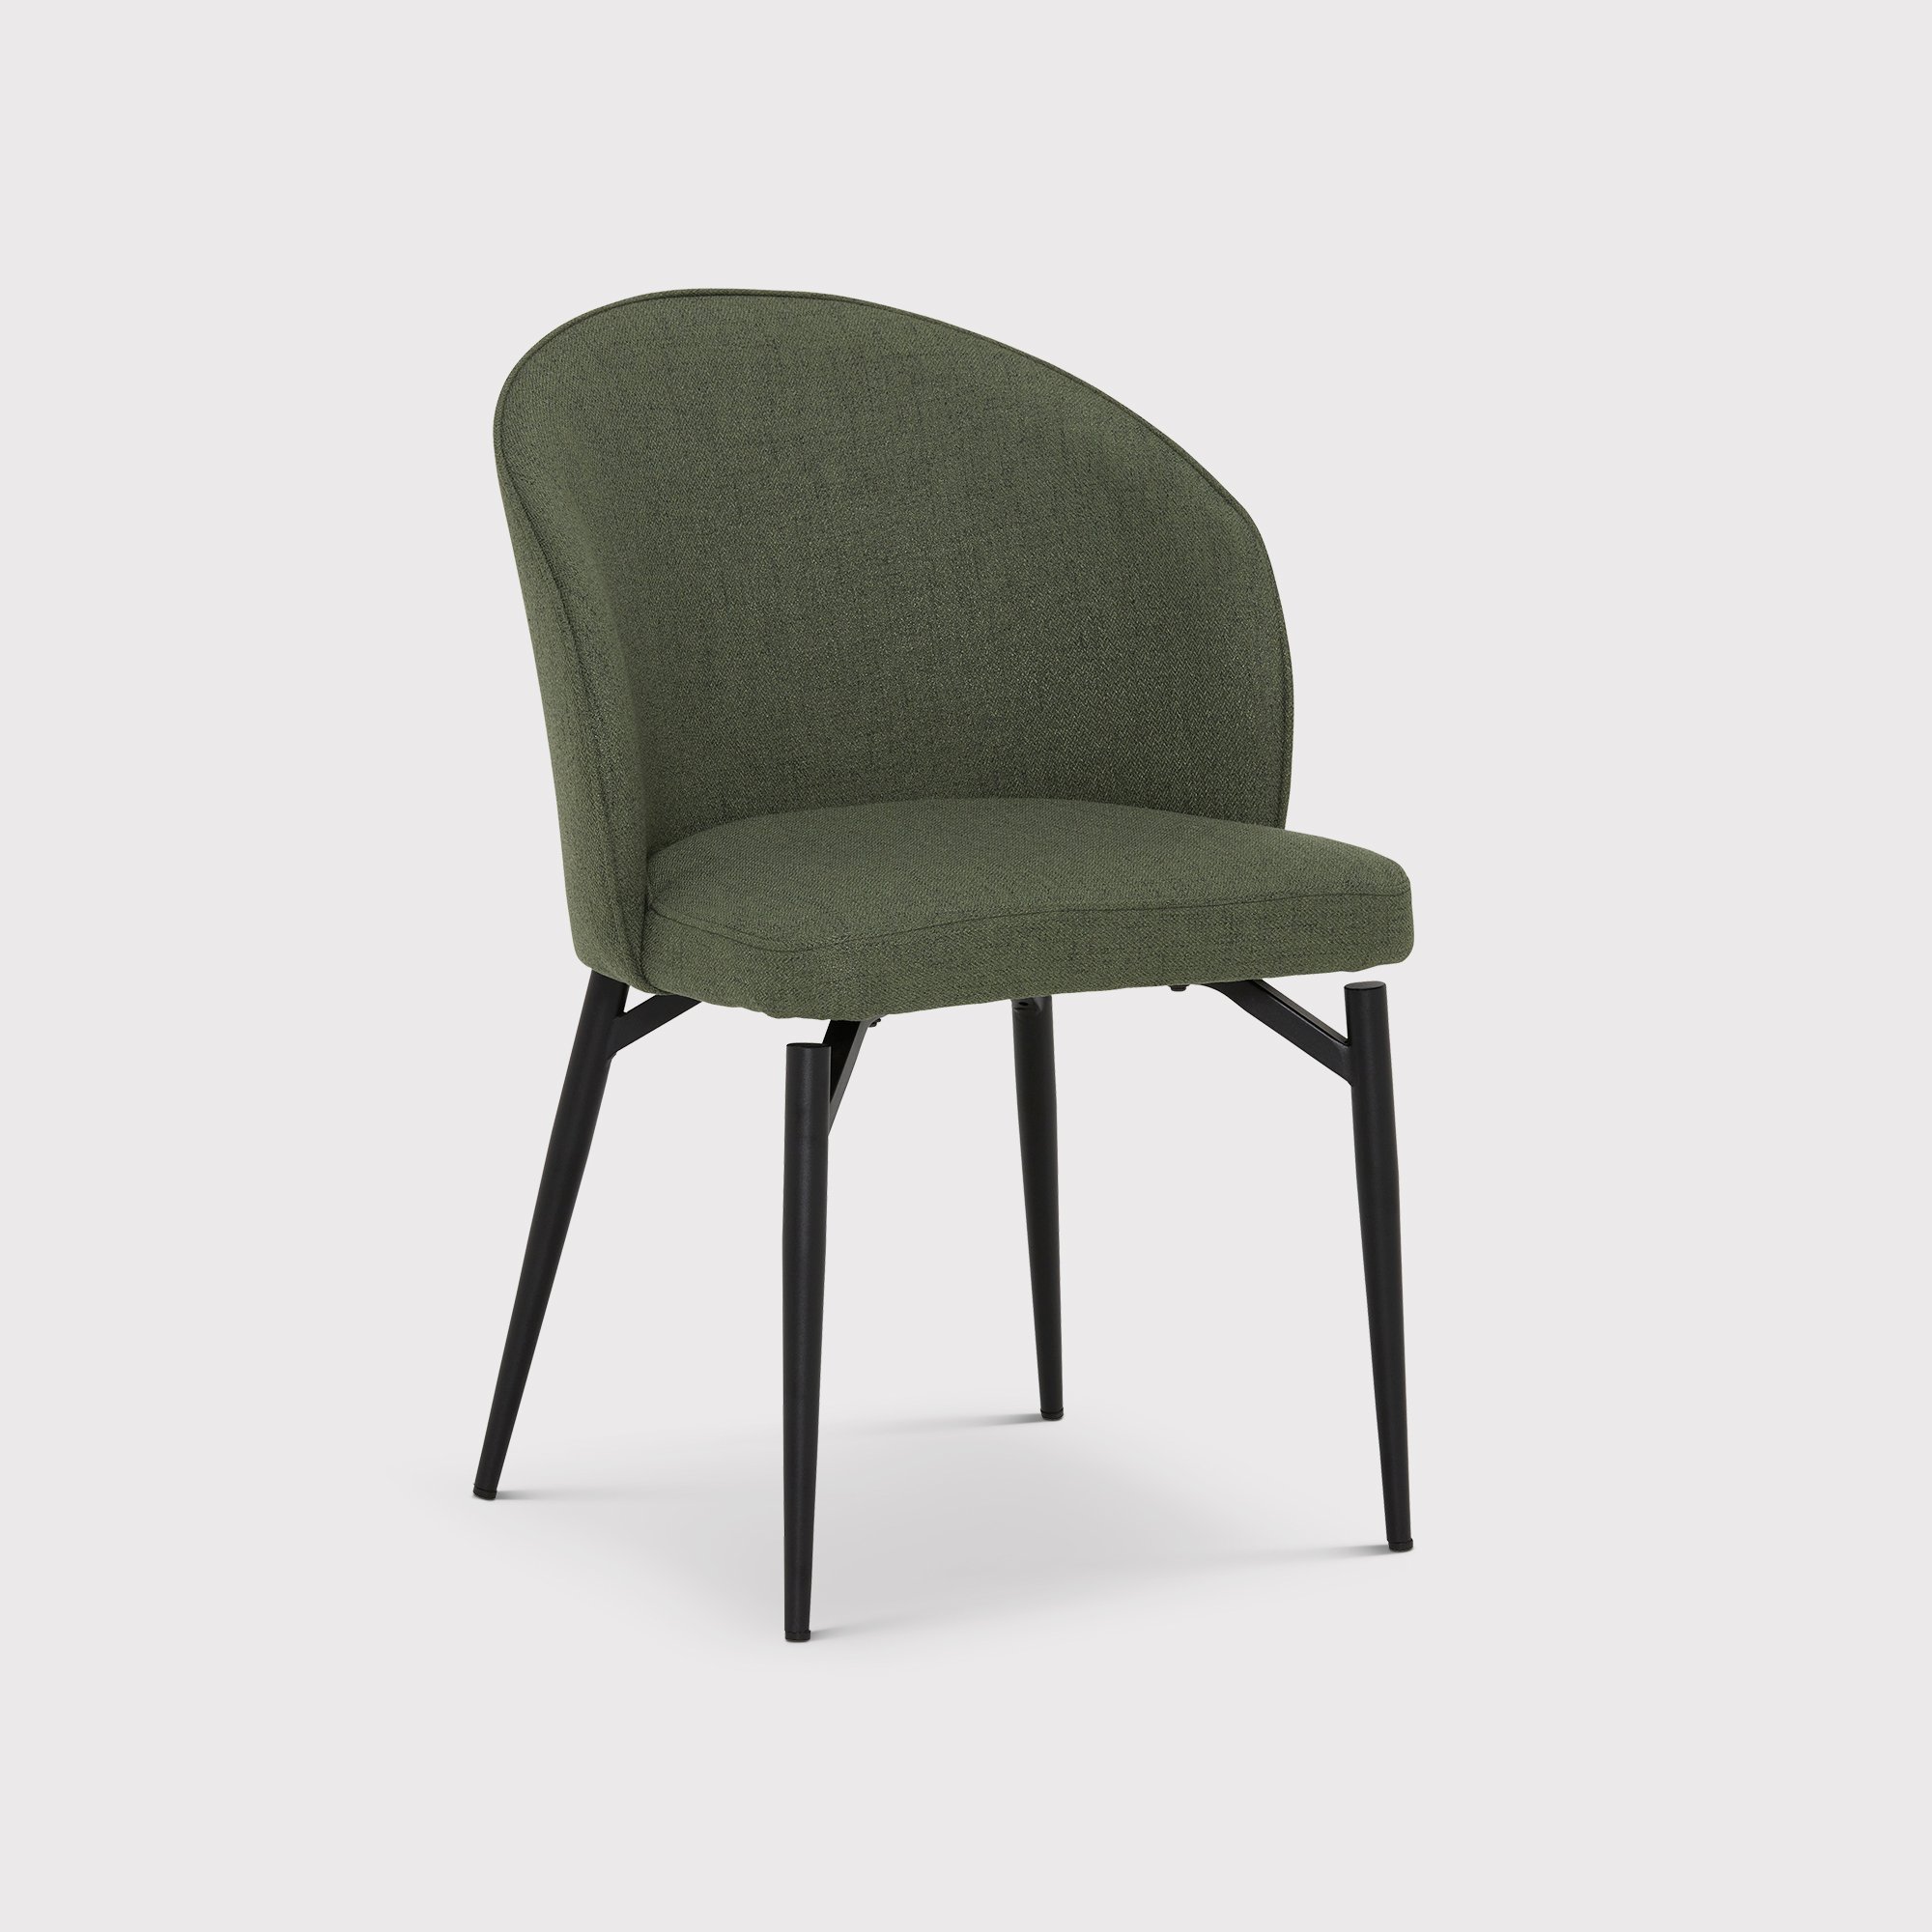 Lauri Dining Chair, Green Fabric | Barker & Stonehouse